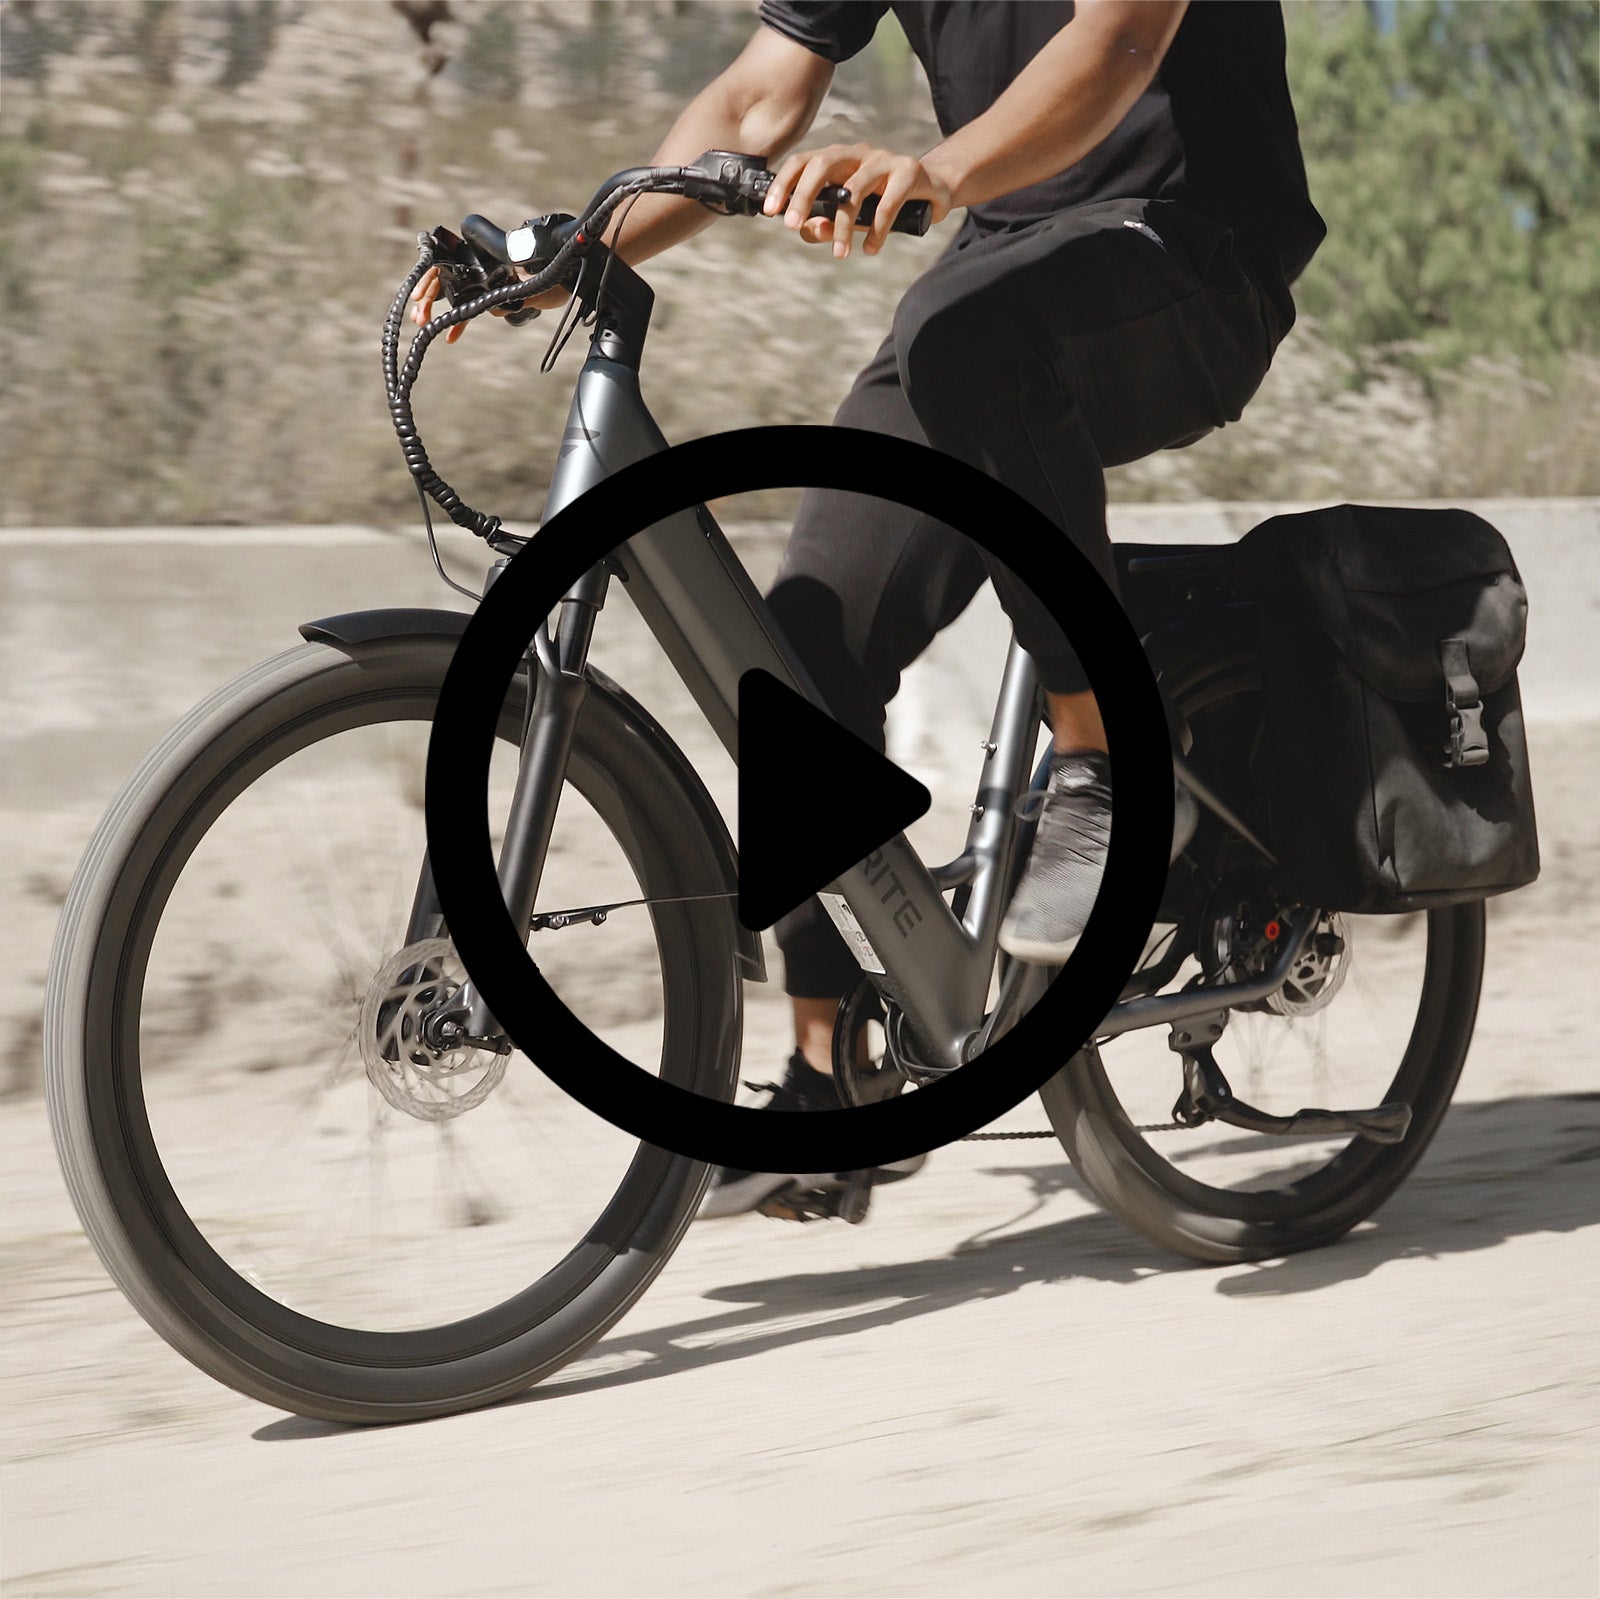 Person riding a sleek, dark grey electric bike from FavoriteBikes on a sandy path, with a black pannier bag attached to the rear. The bike features a modern design with a sturdy frame, hydraulic disc brakes, and a bright headlight. The rider is dressed in black clothing and appears to be enjoying a smooth ride.